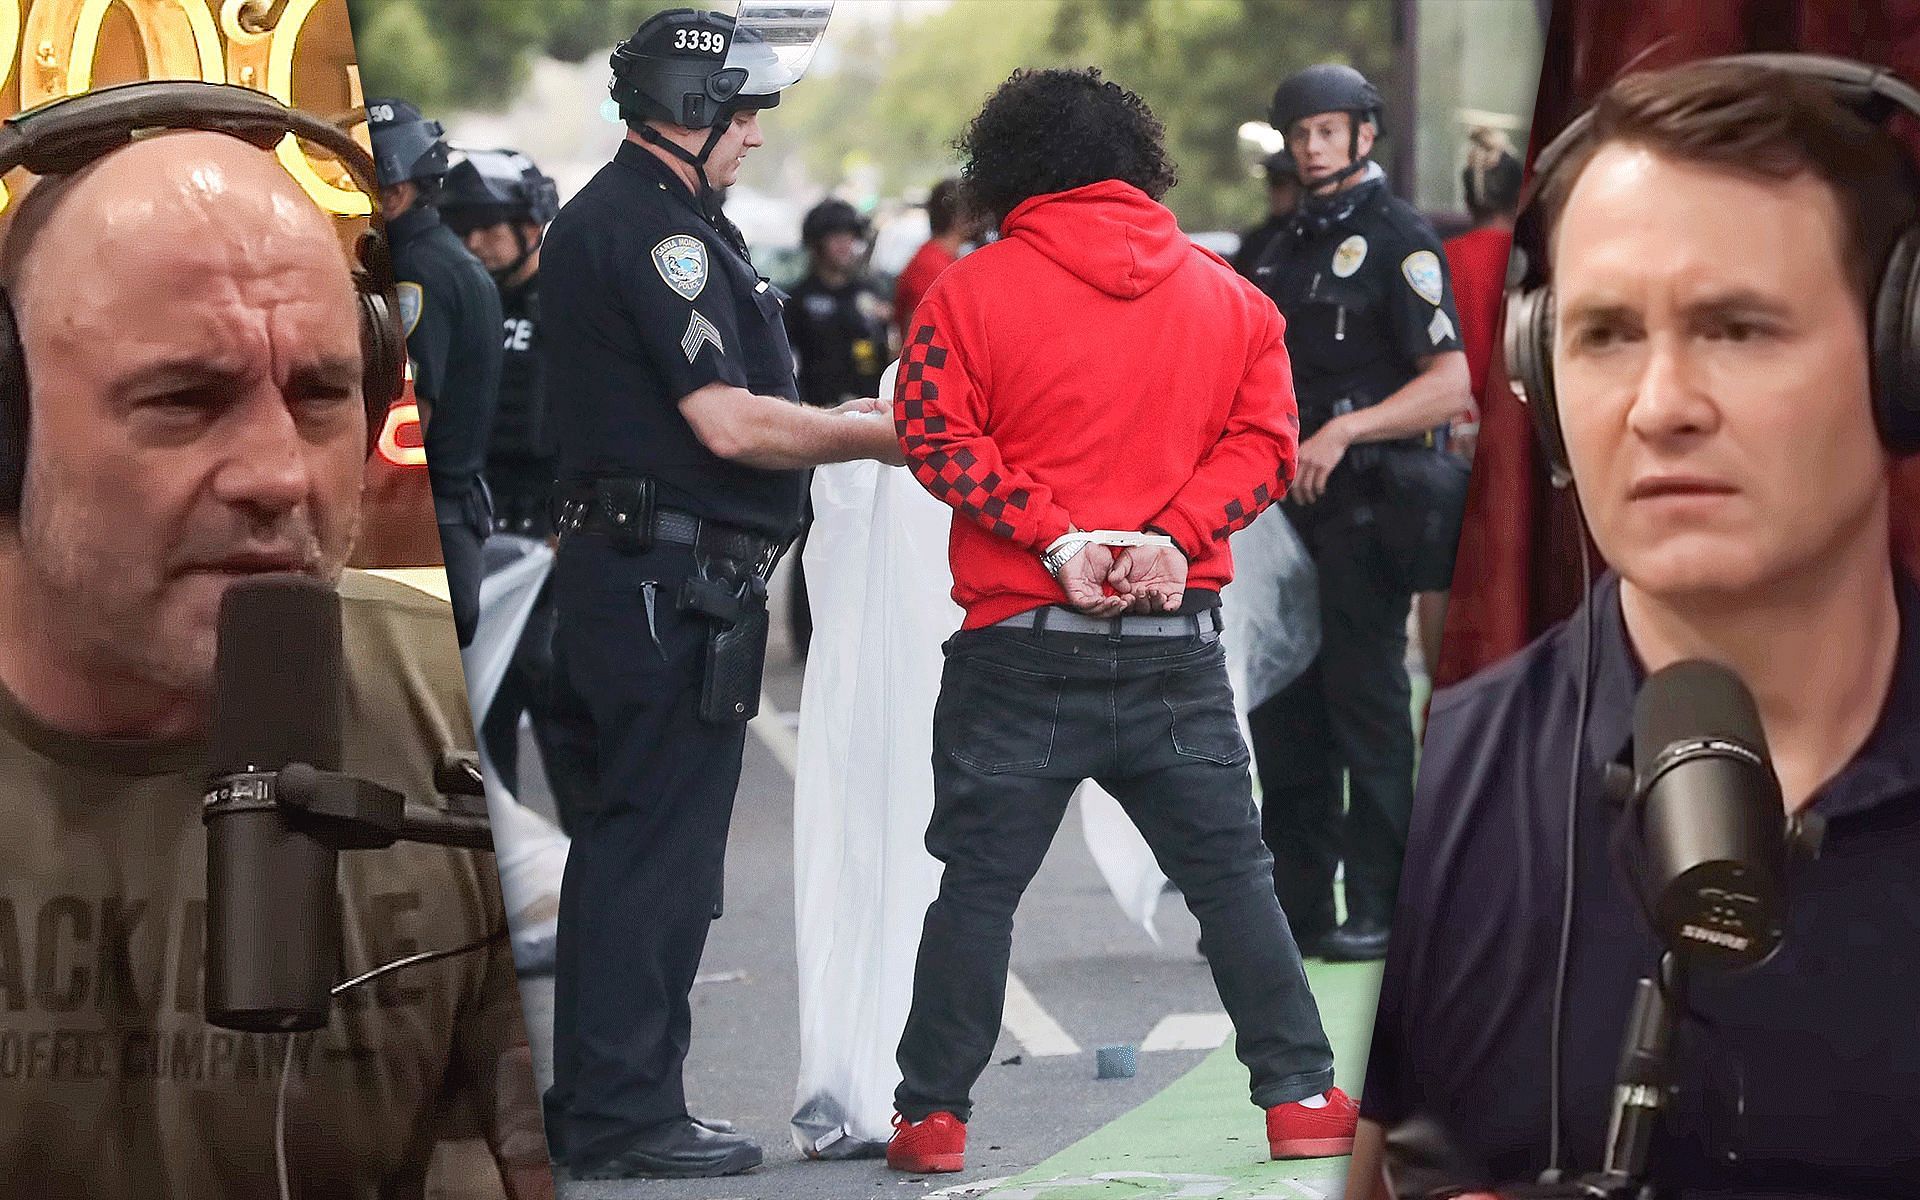 Joe Rogan (left), person getting arrested for lighting fires in Portland (center image via cnn.com), Douglas Murray (right) (other images from powerfulJRE youtube)